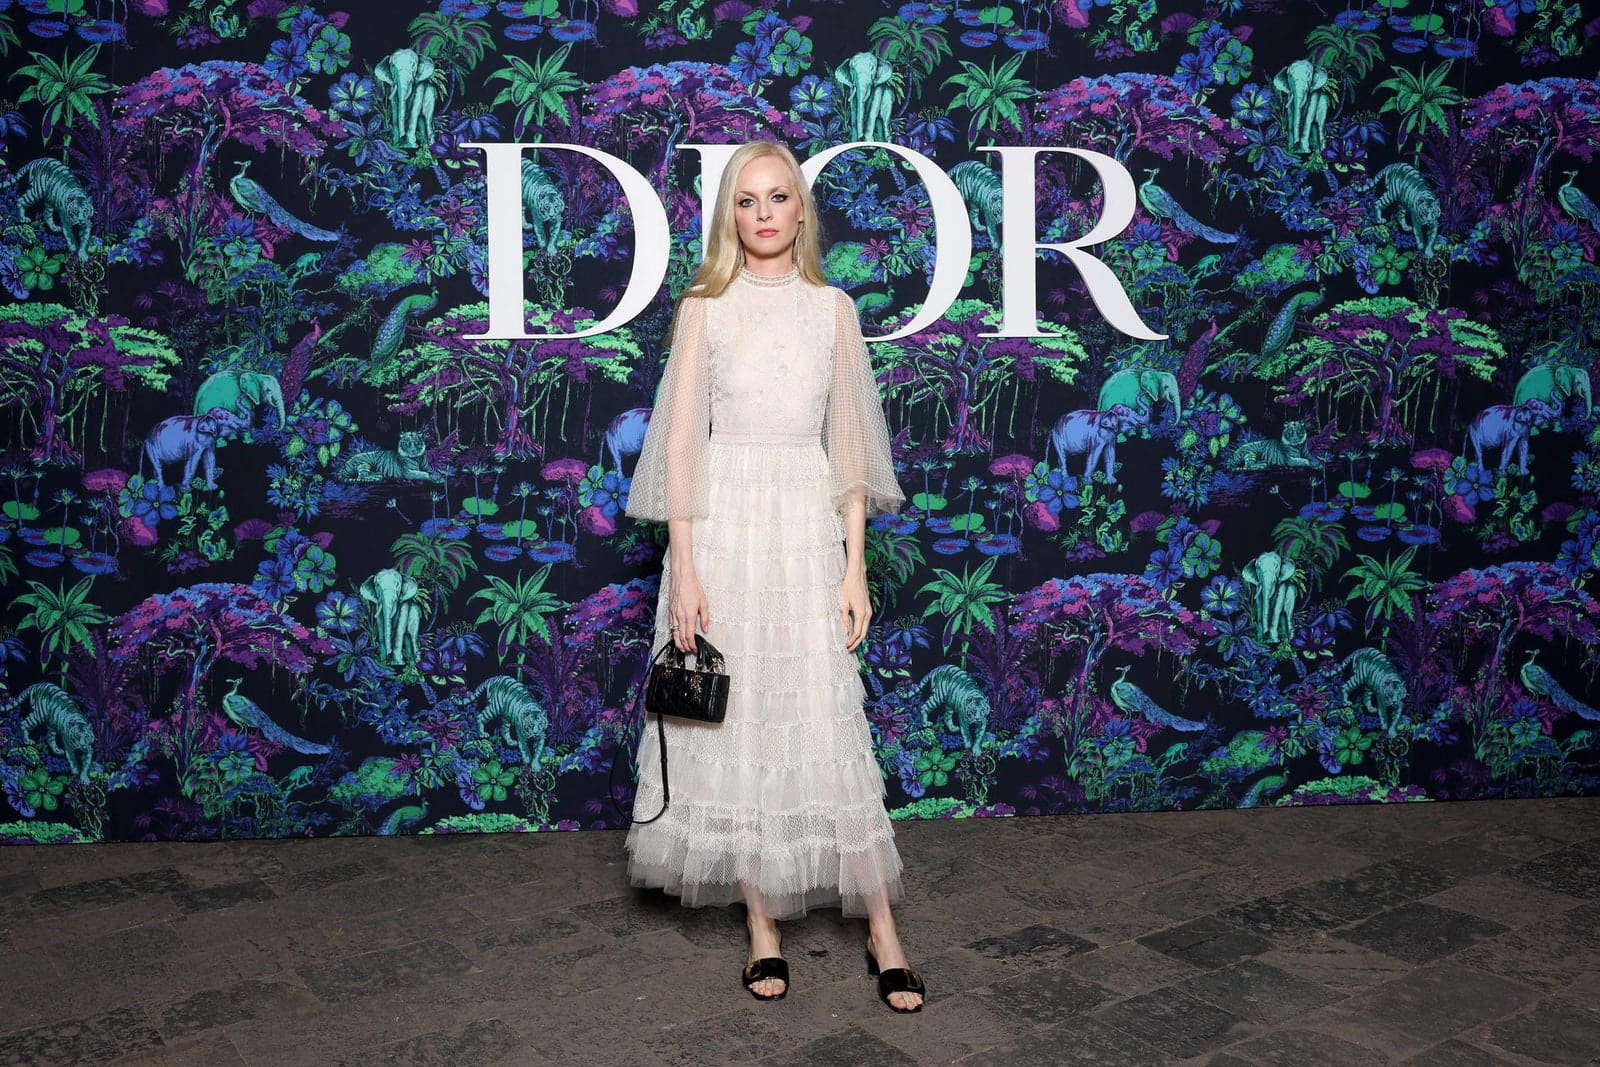 Dior Fall/Winter 2023 Show In Mumbai Sofia Achaval de Montaigu wore a Dior Spring-Summer 2023 beige tulle and lace dress.